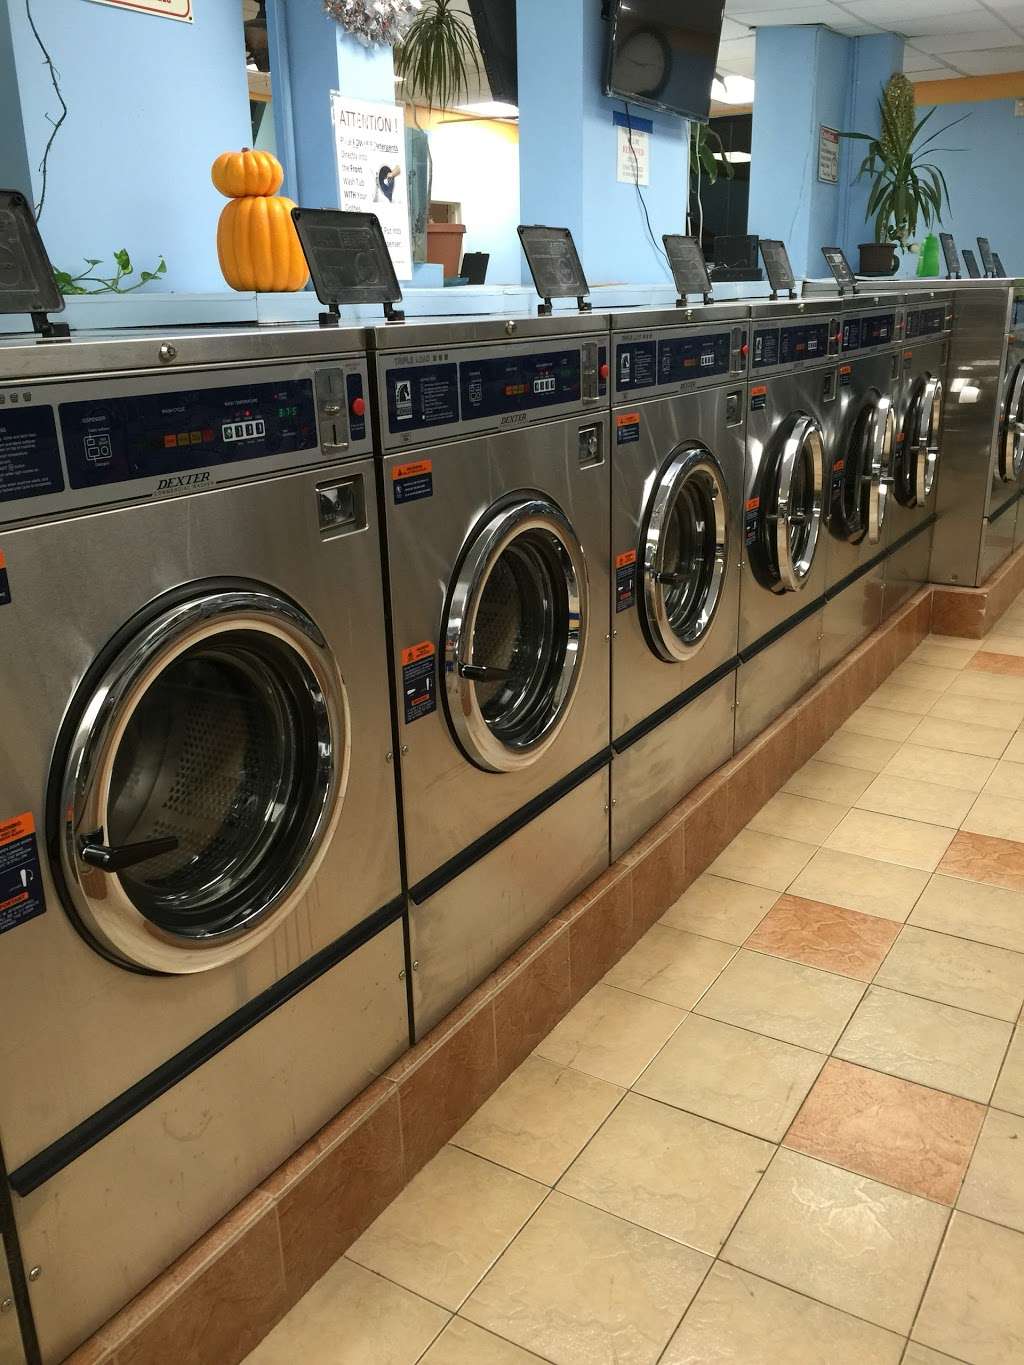 Ever Clean Laundromat and Drycleaner | 230 Rhode Island Ave, East Orange, NJ 07018 | Phone: (973) 675-6556